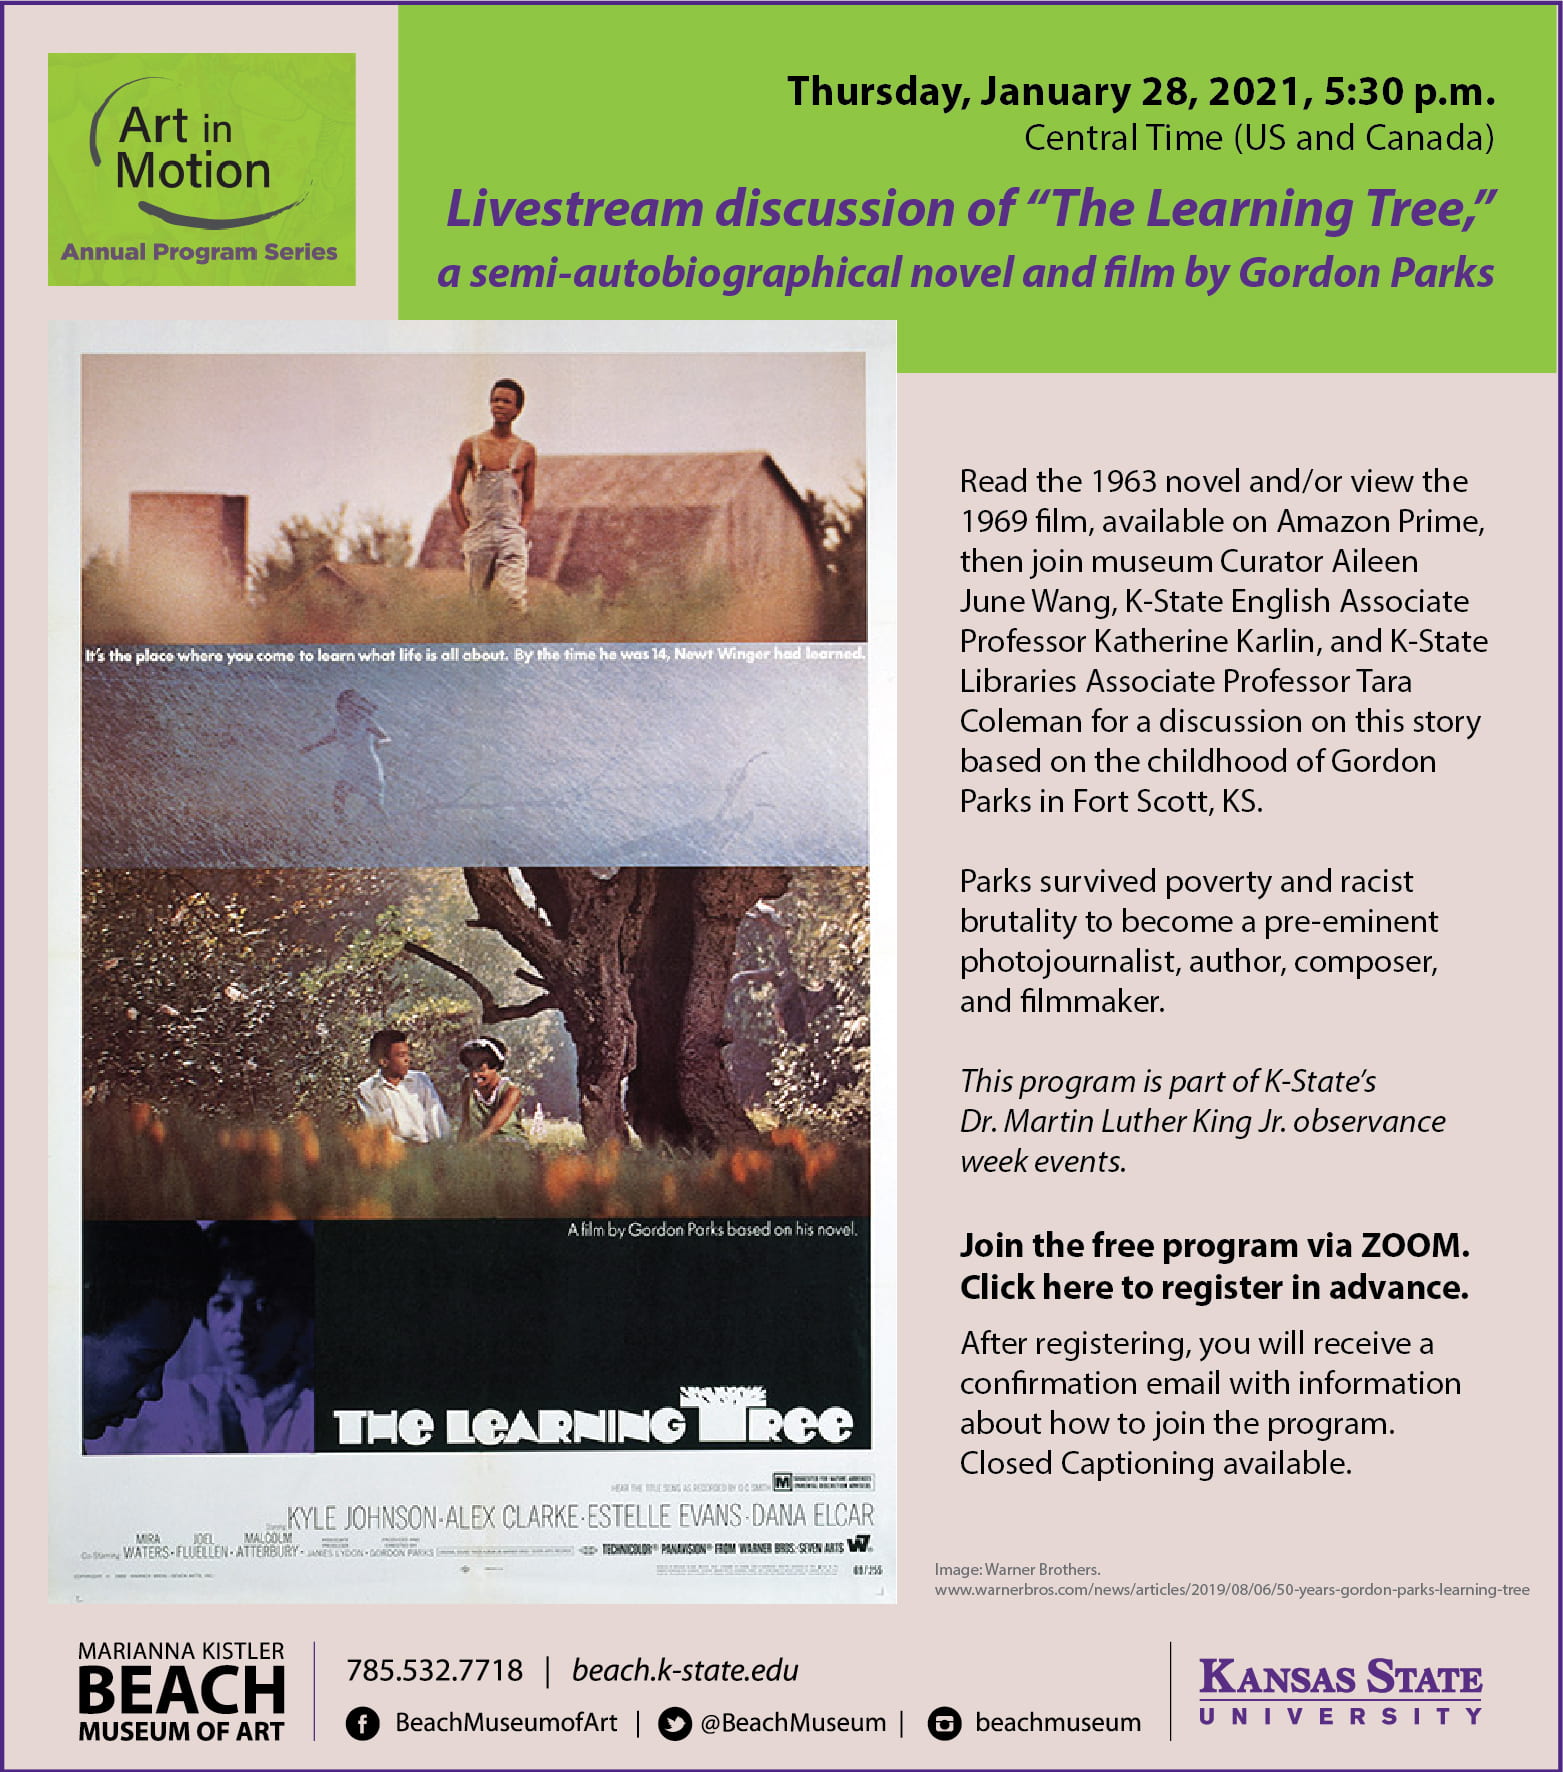 Flyer of Livestream discussion of "The Learning Tree," a novel and film by Gordon Parks.